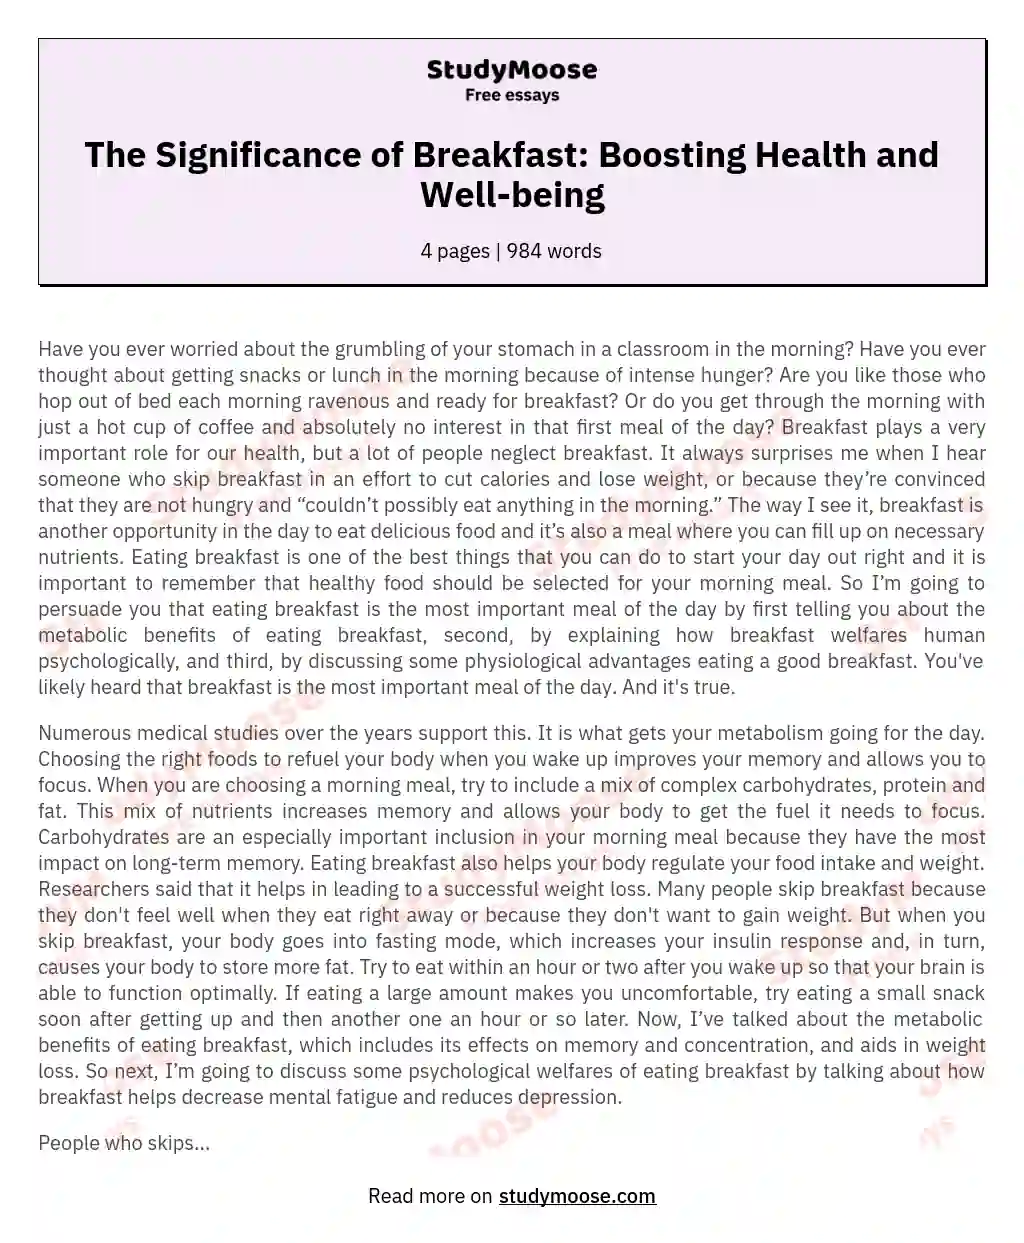 The Significance of Breakfast: Boosting Health and Well-being essay